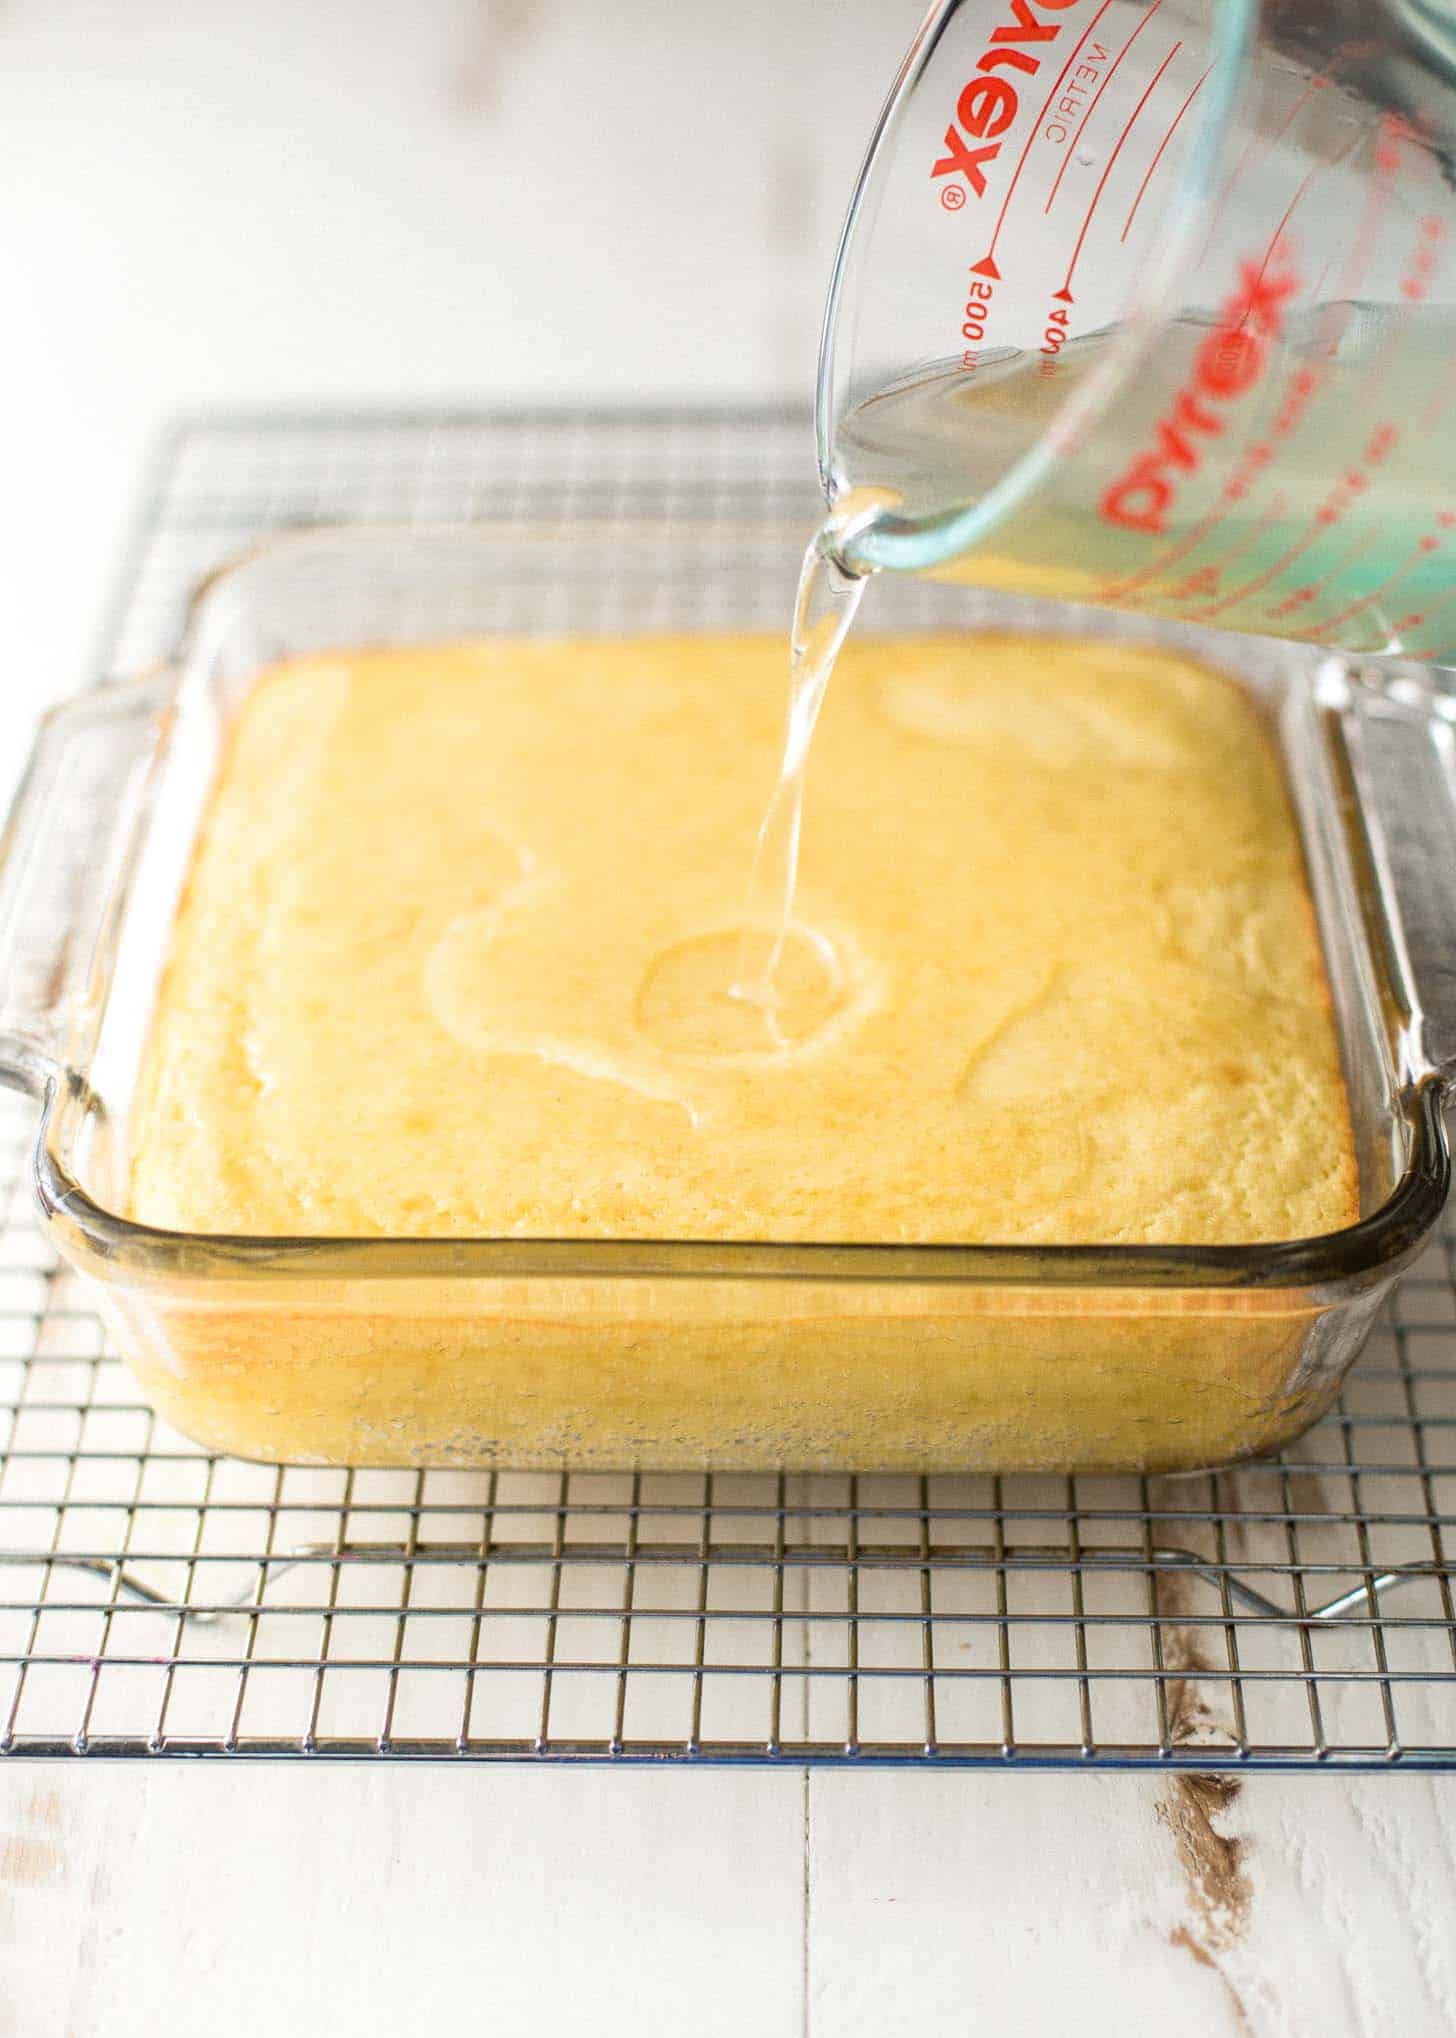 pouring simple syrup over the cake in a clear baking dish